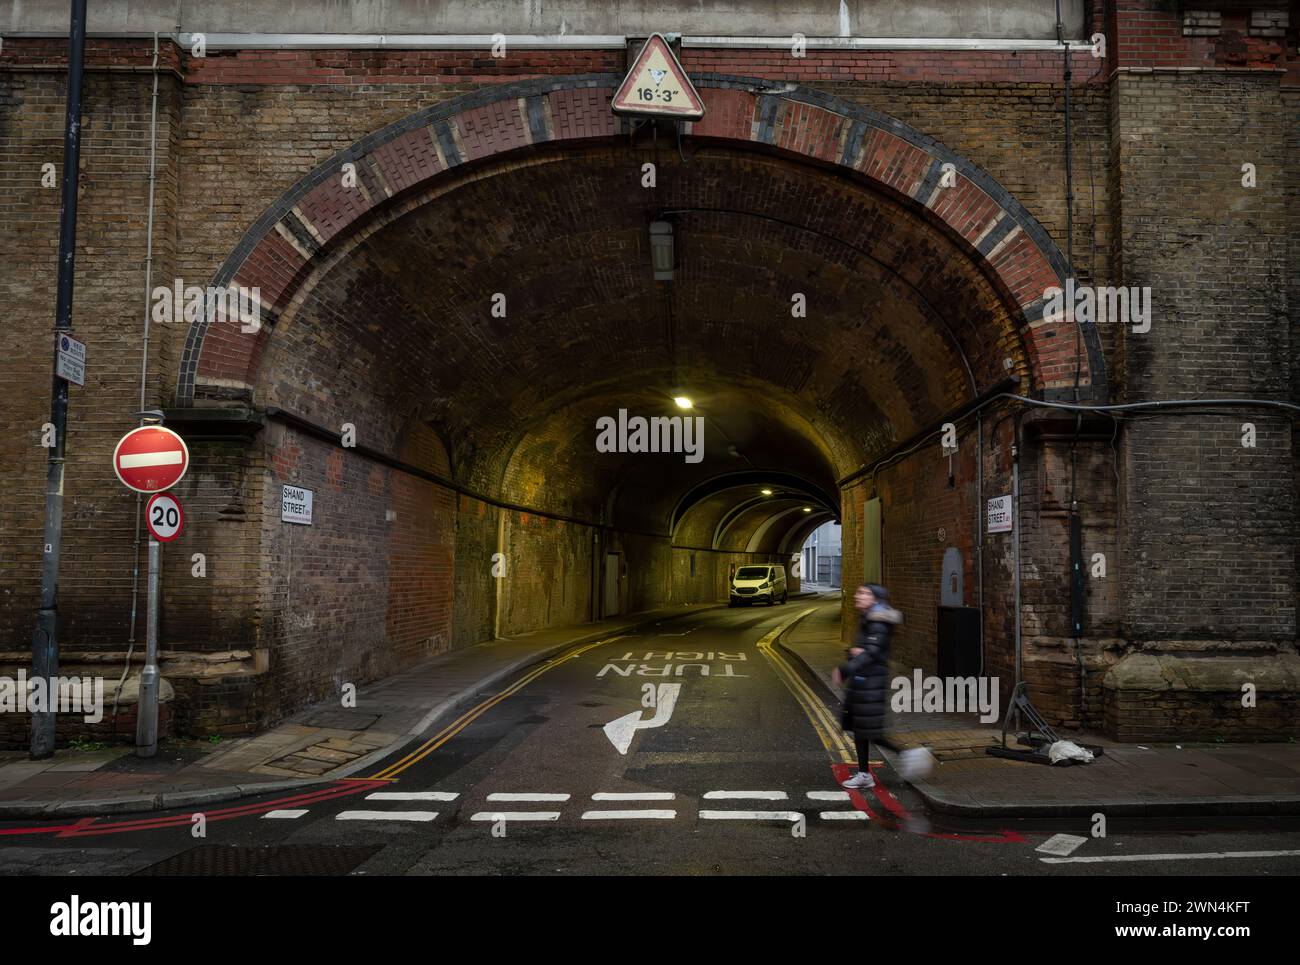 Bermondsey, London, UK: Shand Street passing through a road tunnel under the London Bridge to Greenwich Railway Viaduct. Junction with Crucifix Lane. Stock Photo